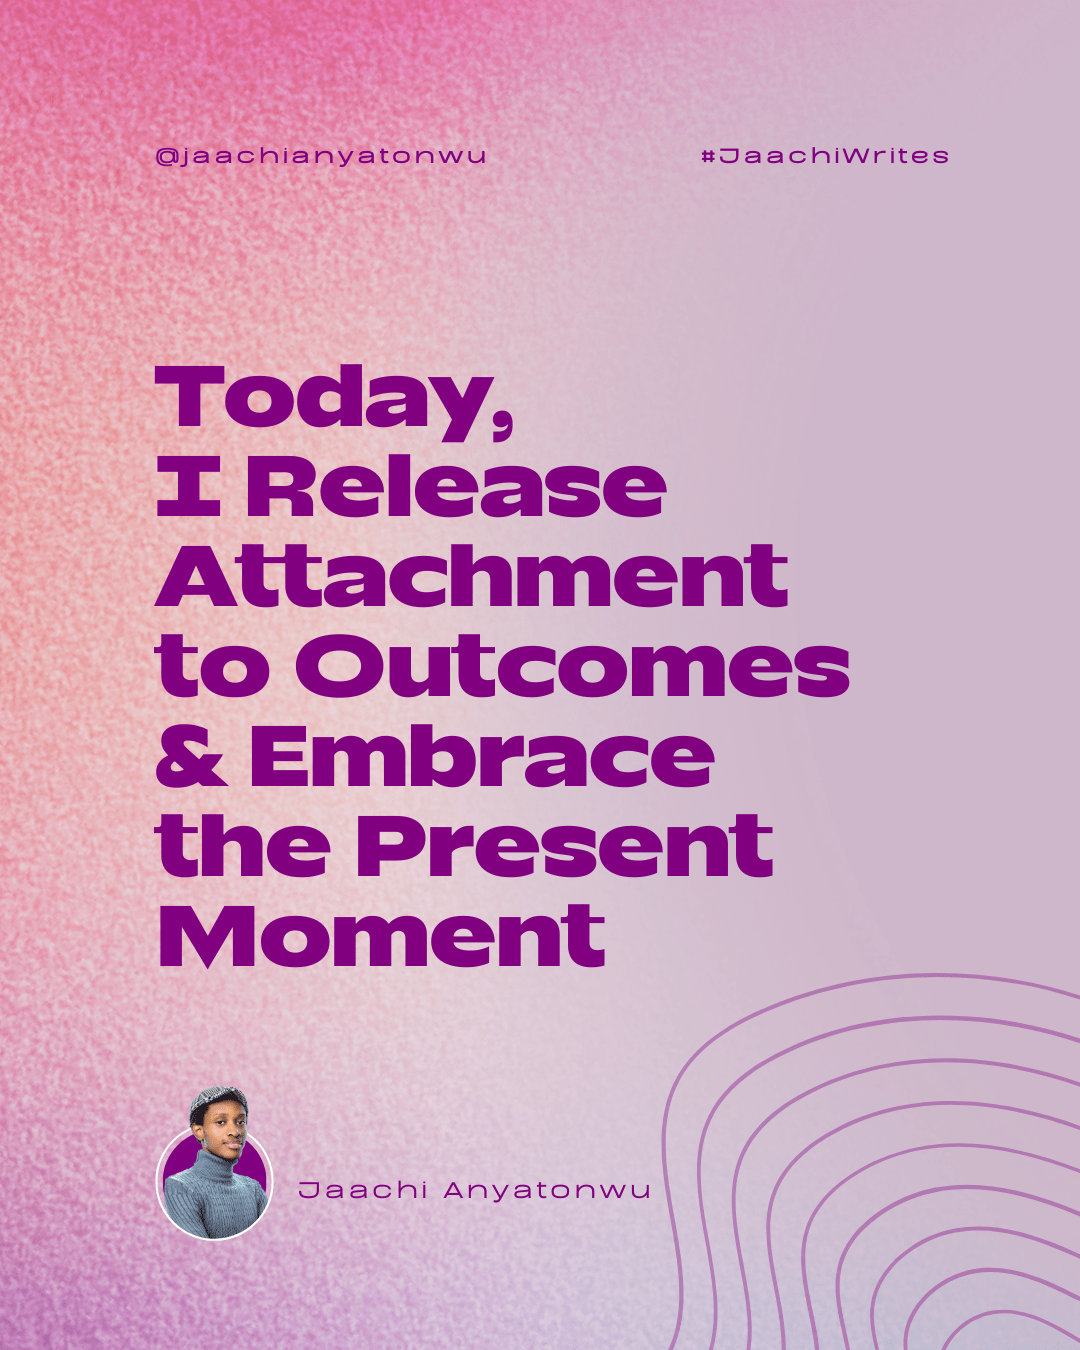 Today, I Release Attachment to Outcomes and Embrace the Present Moment